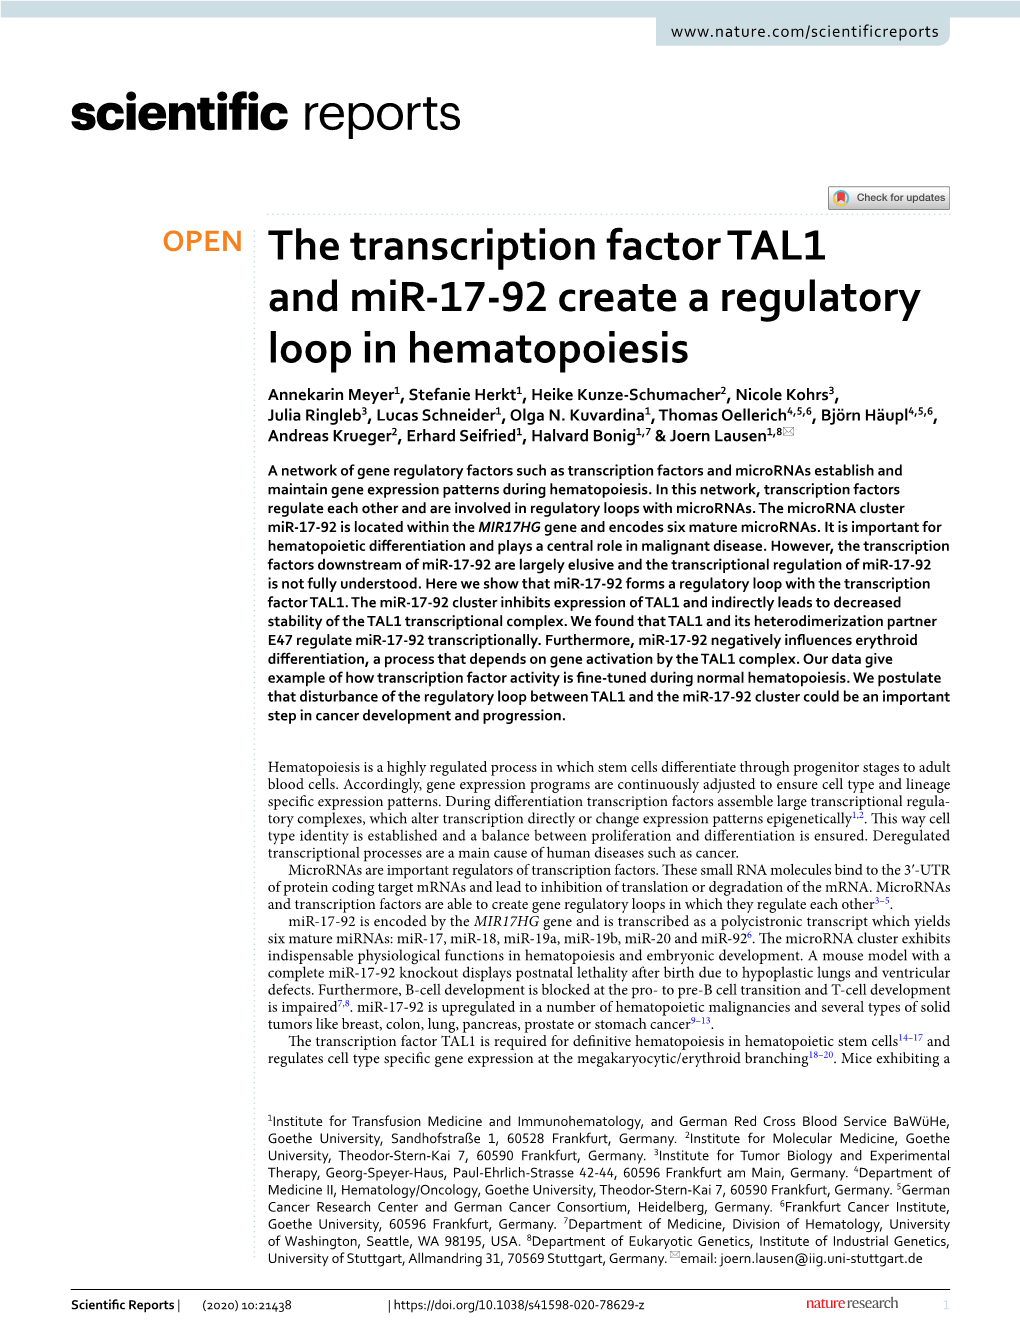 The Transcription Factor TAL1 and Mir-17-92 Create a Regulatory Loop in Hematopoiesis